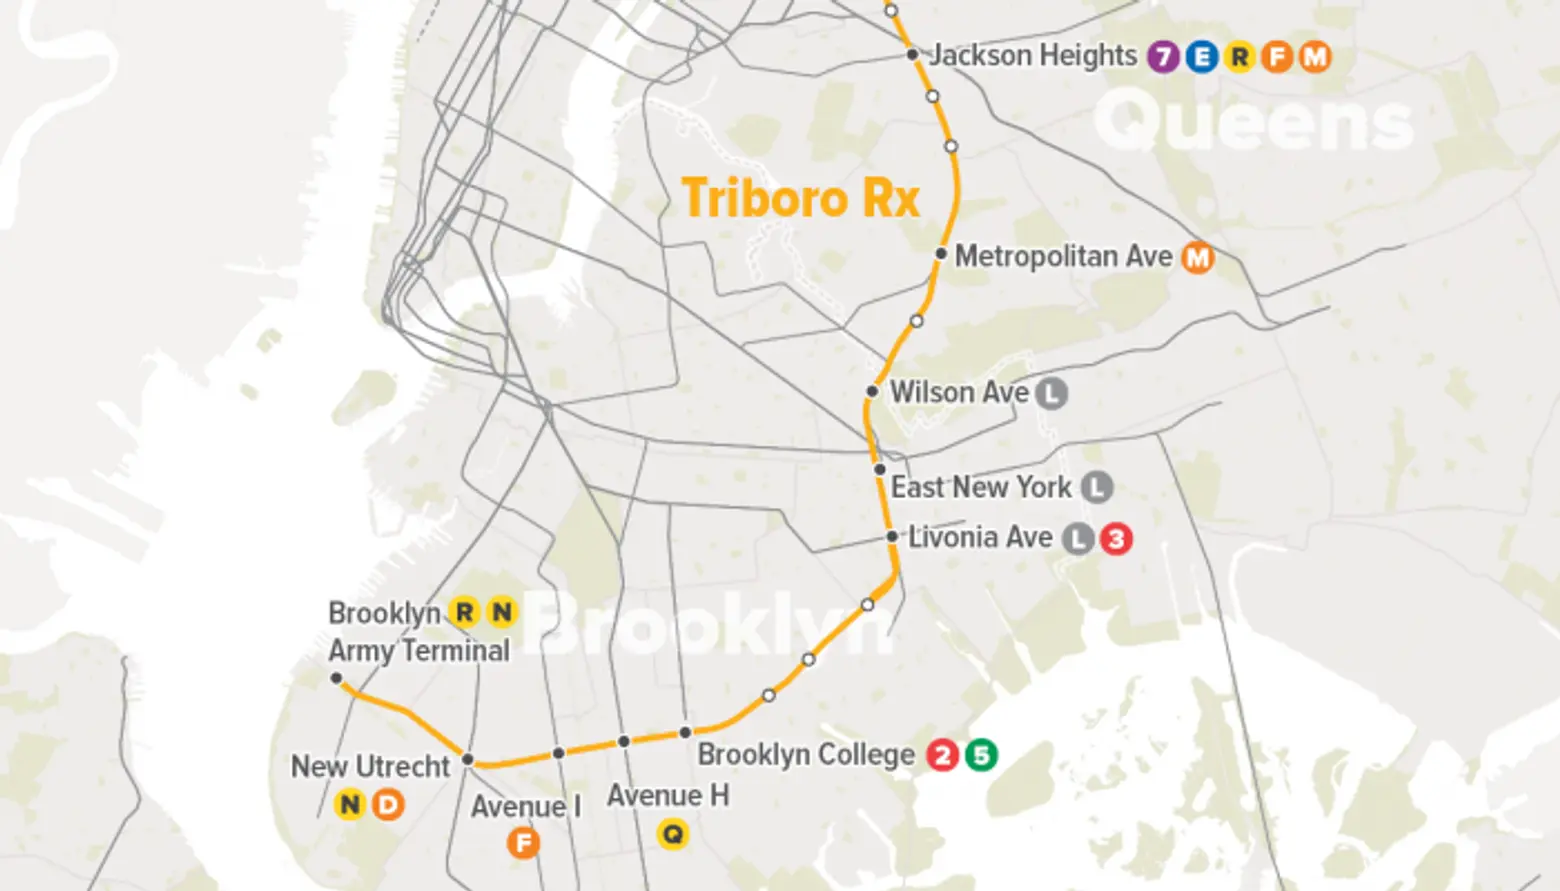 Proposed ‘Triboro Rx’ Subway Line Would Better Connect the Outer Boroughs